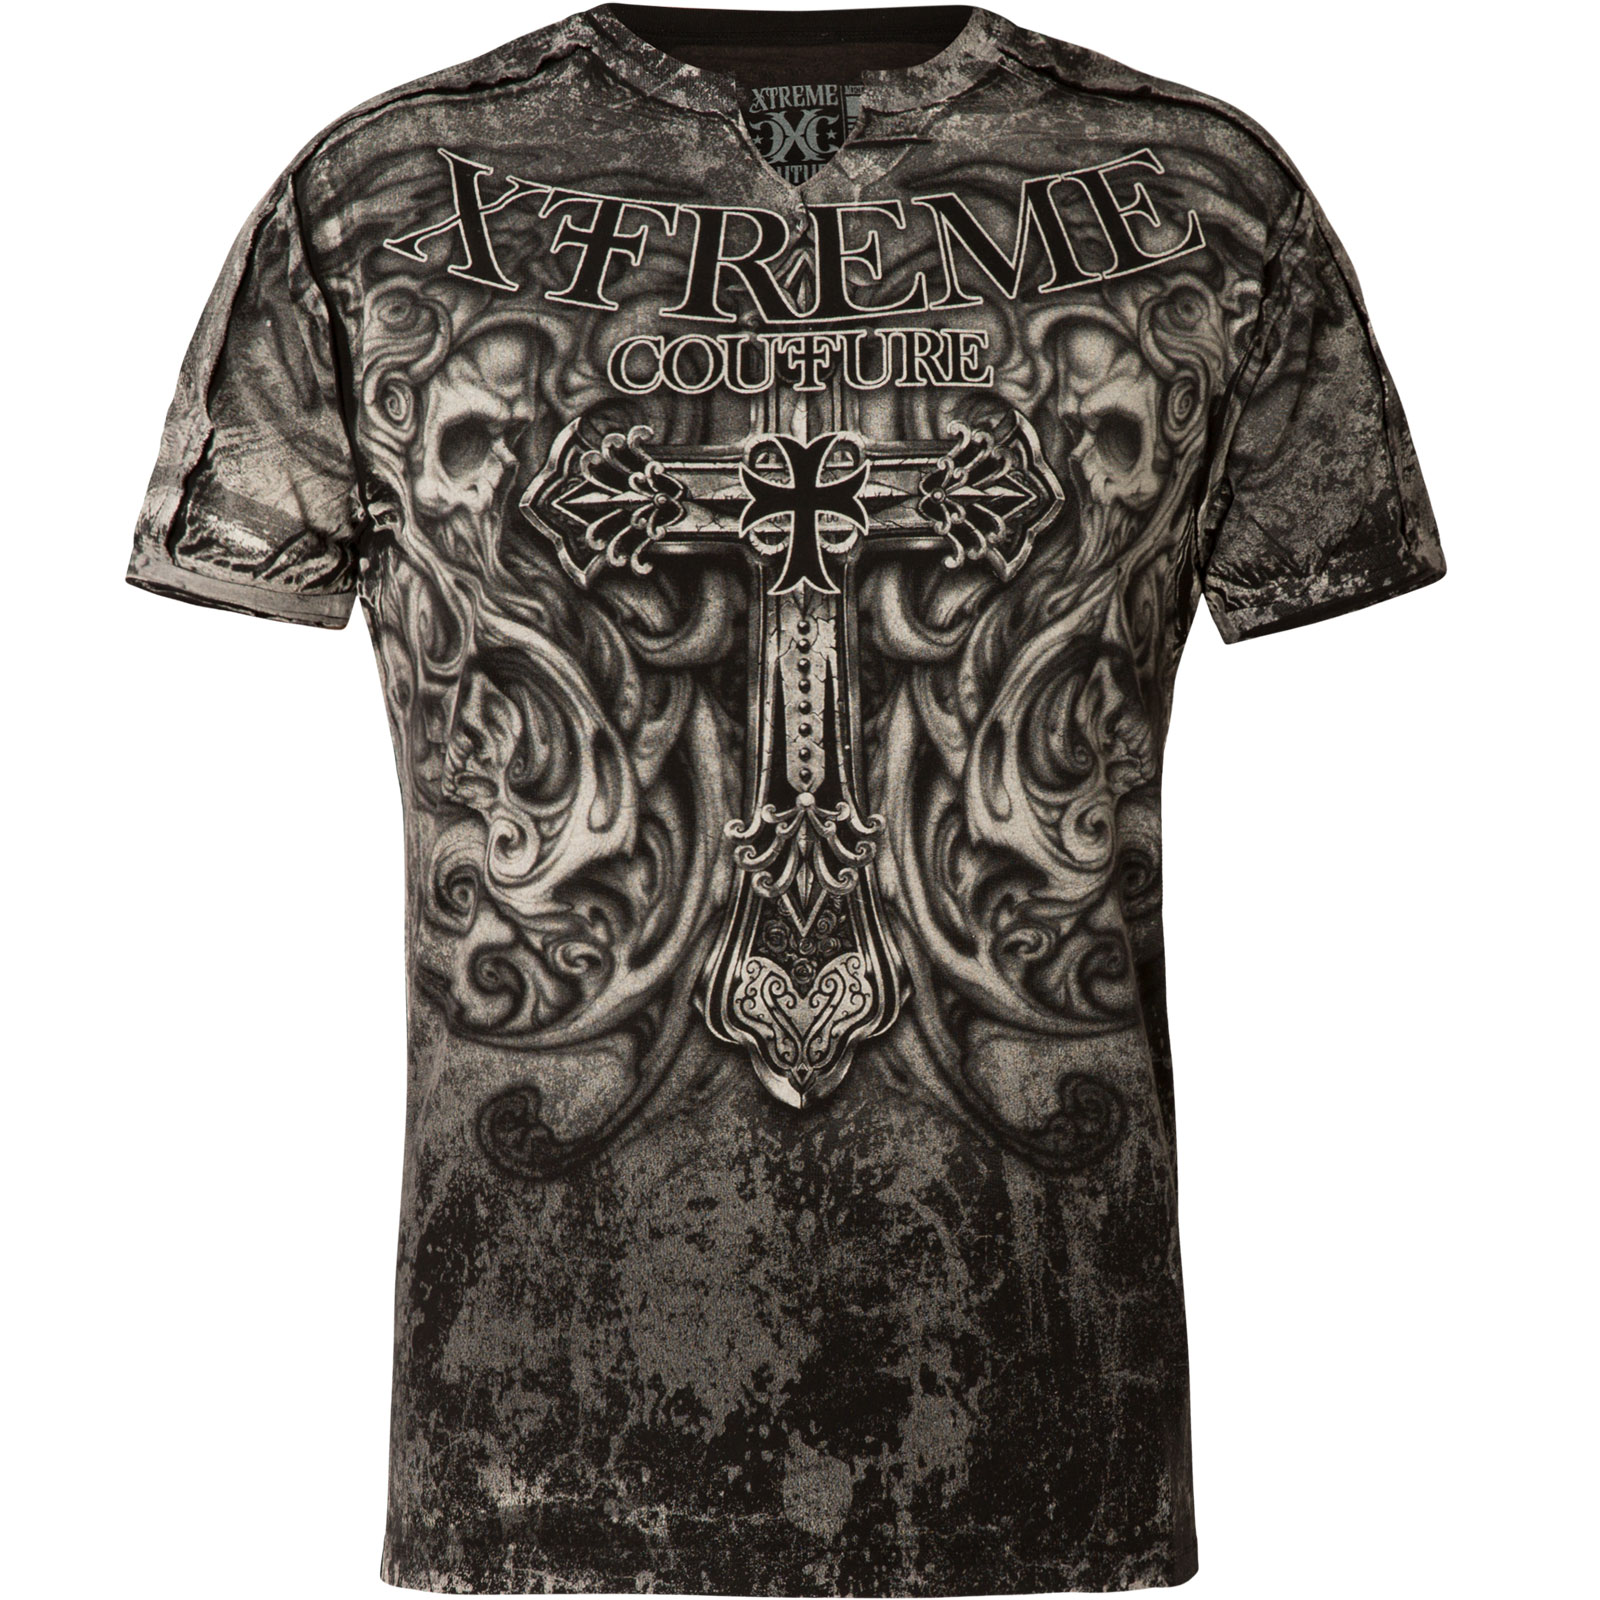 Xtreme Couture T- Shirt Hades SS Notch with a large cross and skulls